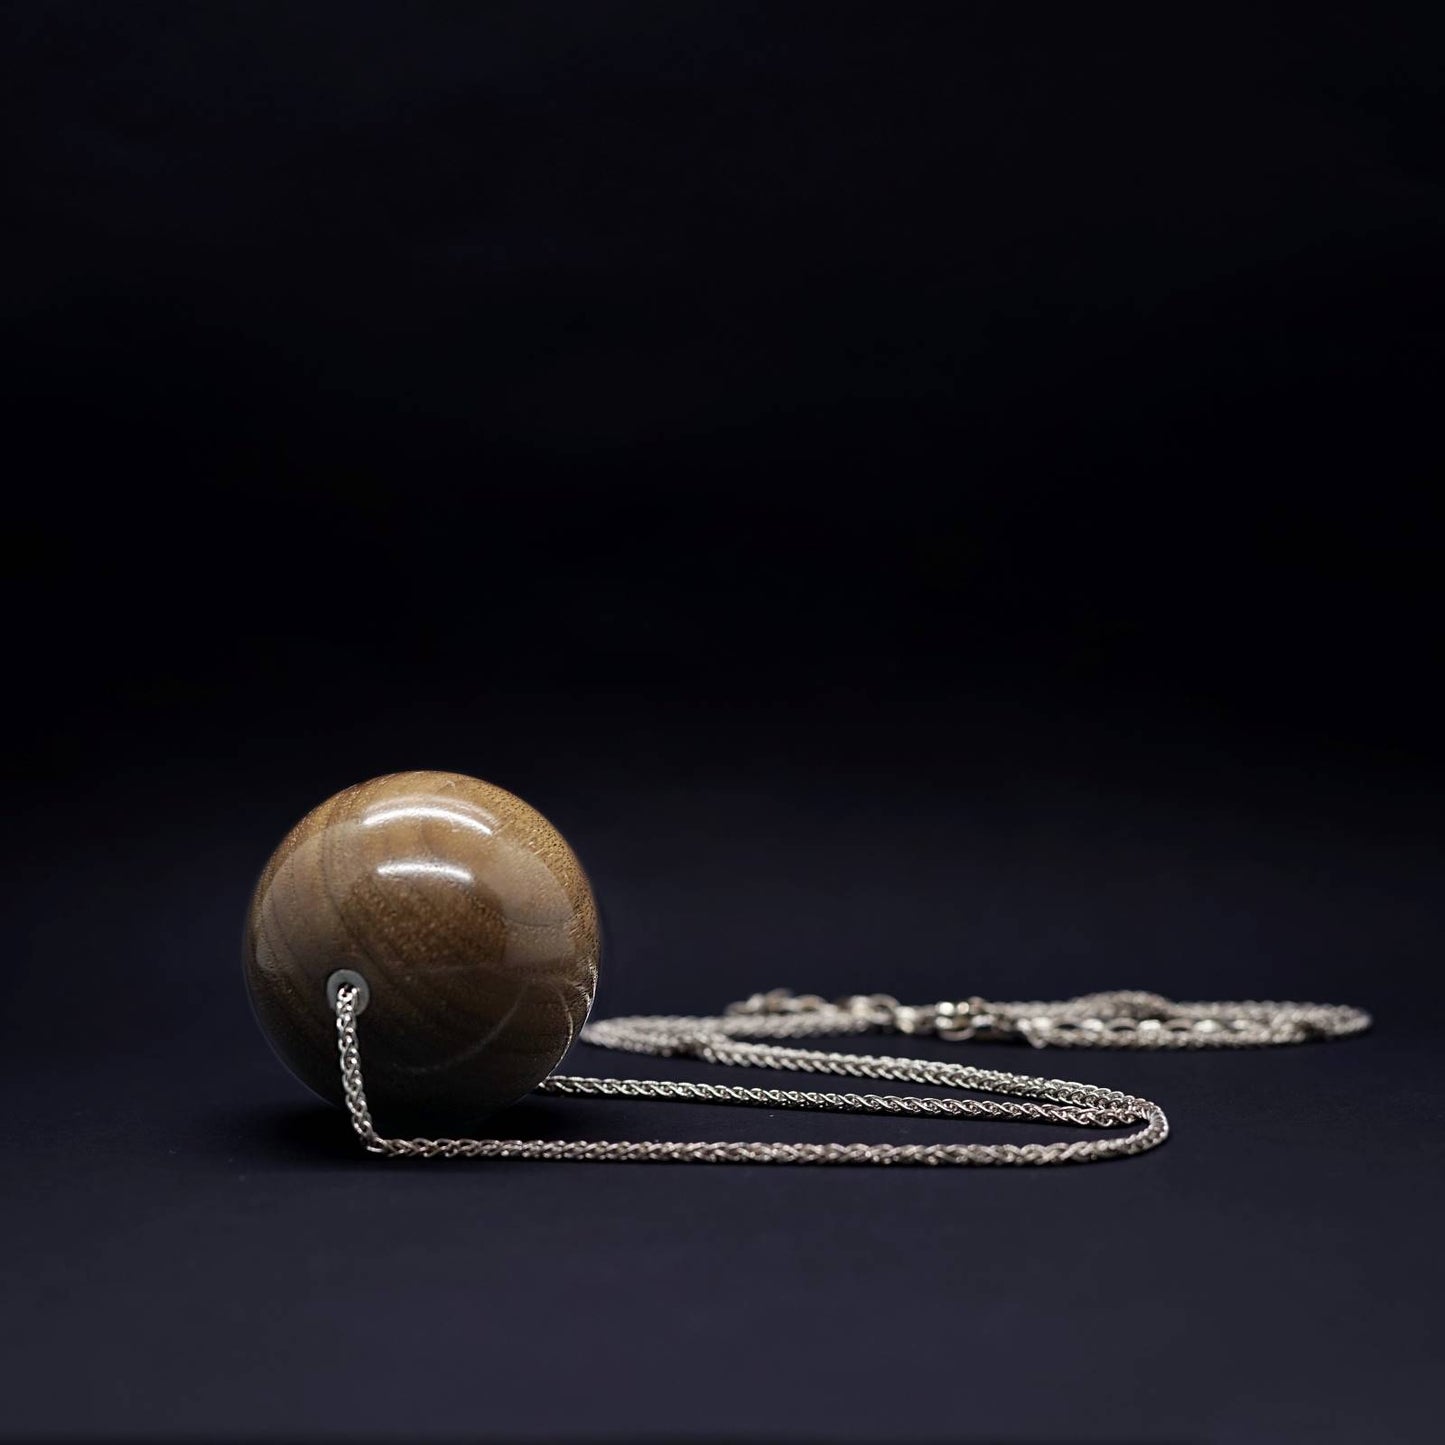 Gaia Giant 50mm wood Bead Pendant with silver detail on Long sterling silver  chain for this vegan necklace by Silverwood Jewellery